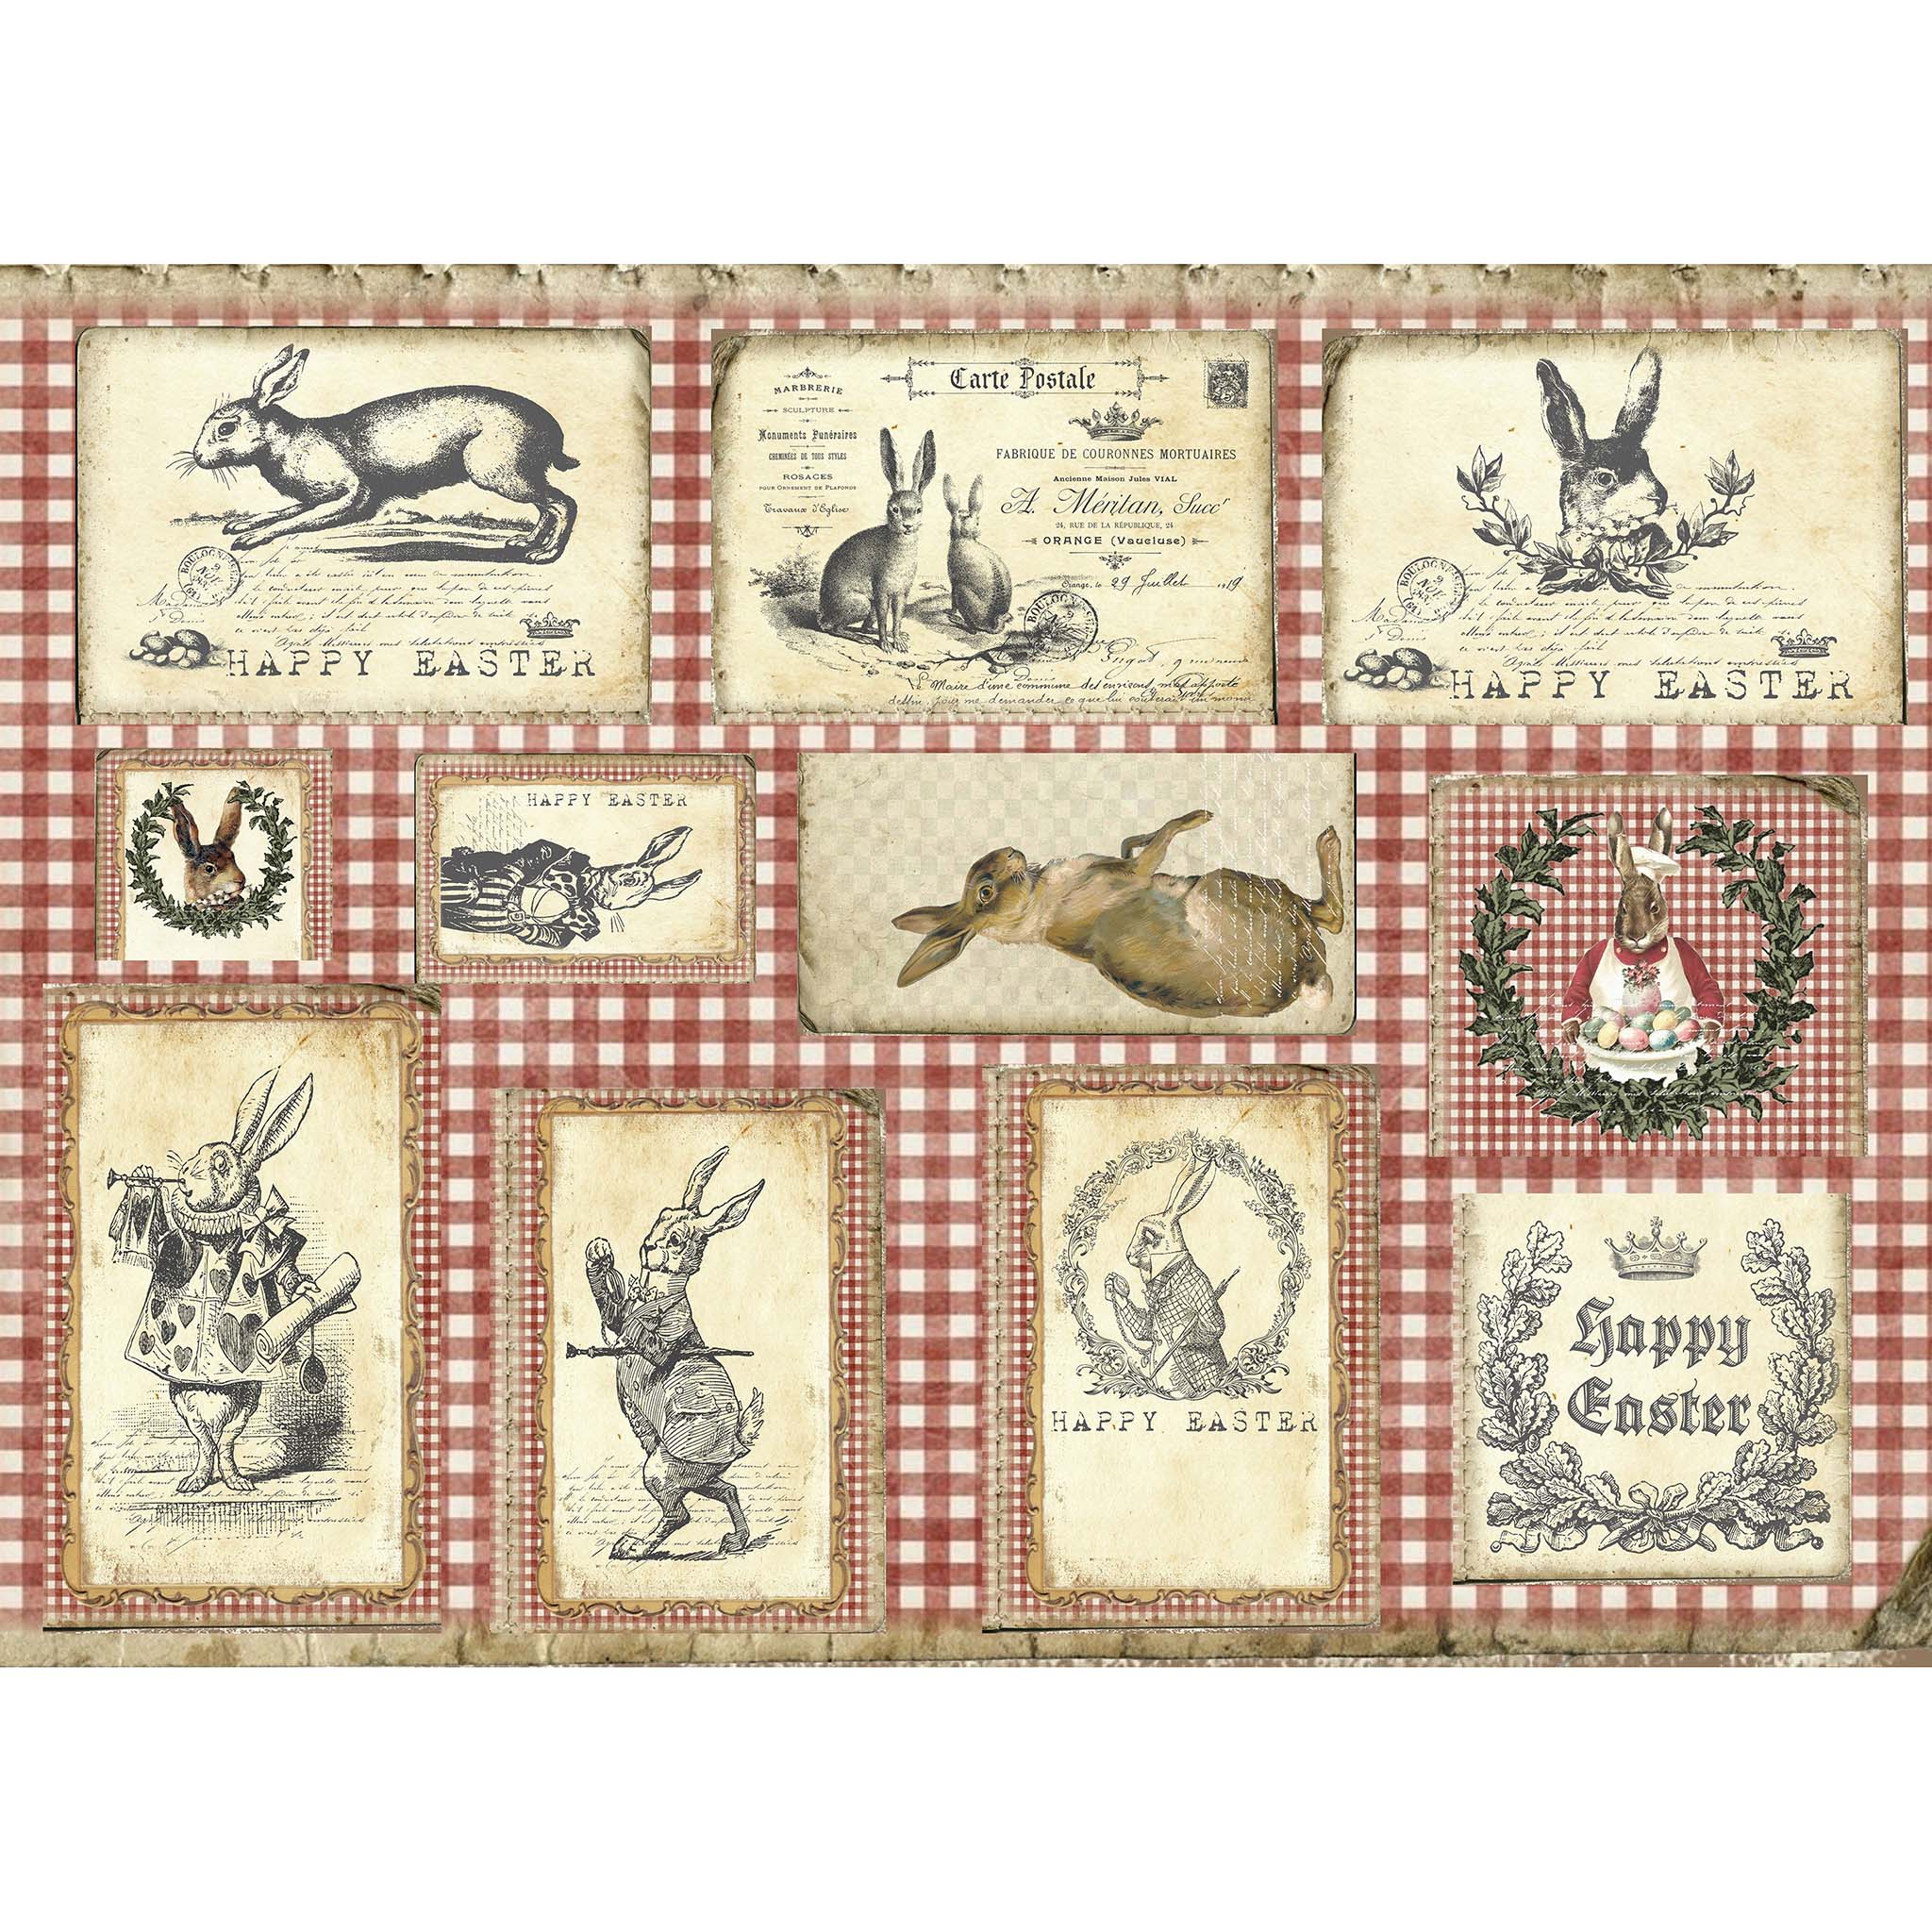 Tissue paper design featuring a vintage red check background and 10 charming rabbit images, plus a "happy easter" message. White borders are on the top and bottom.